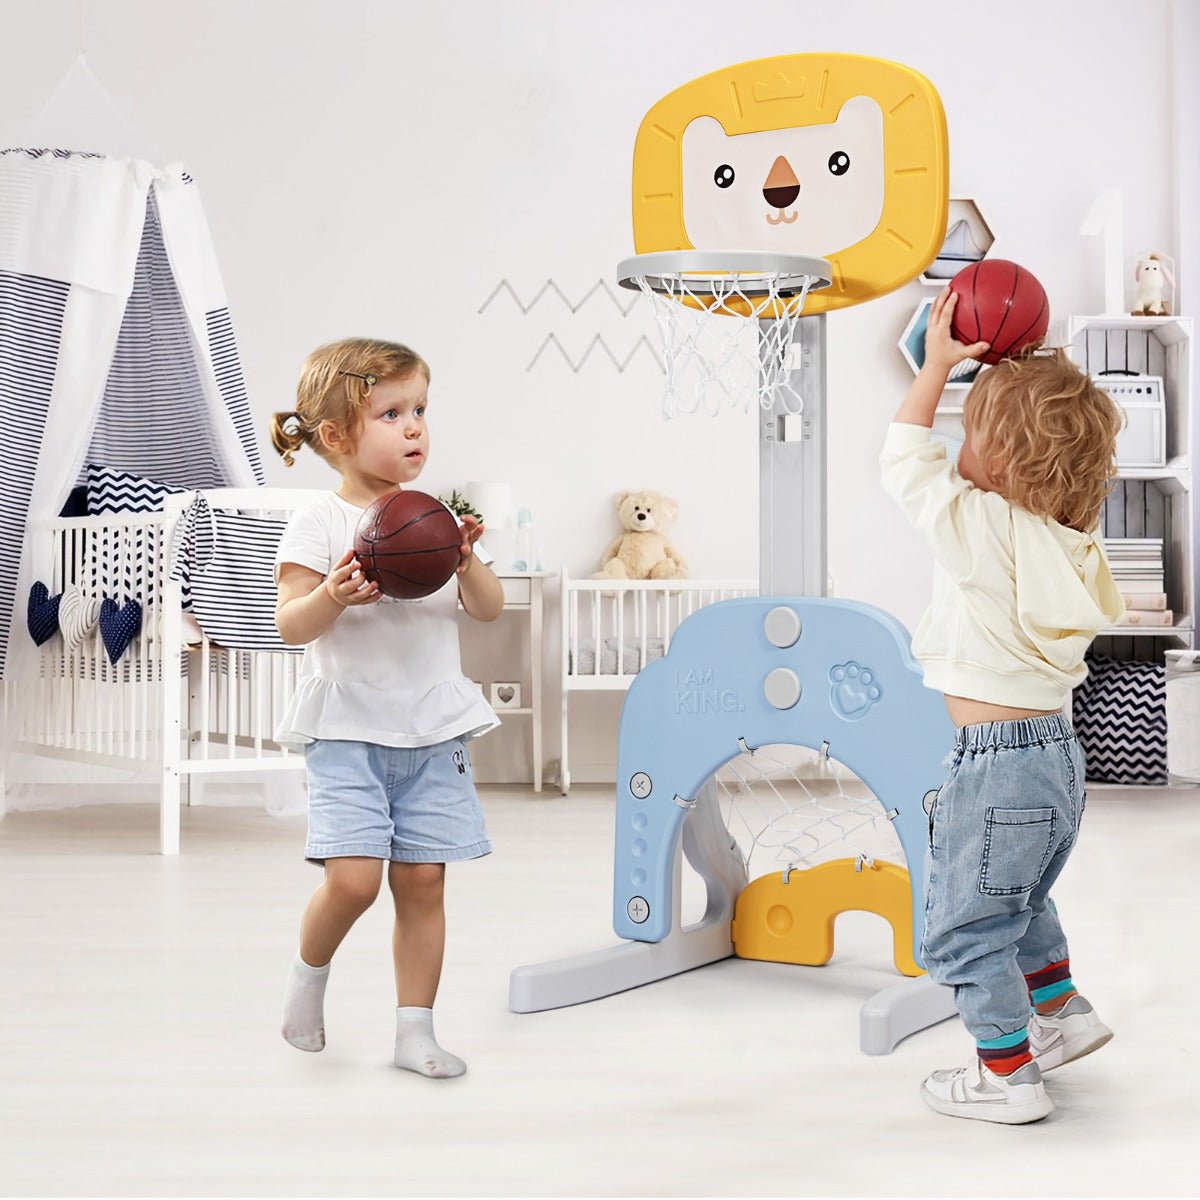 Children's Playground: Height Adjustable Basketball Stand for Active Play